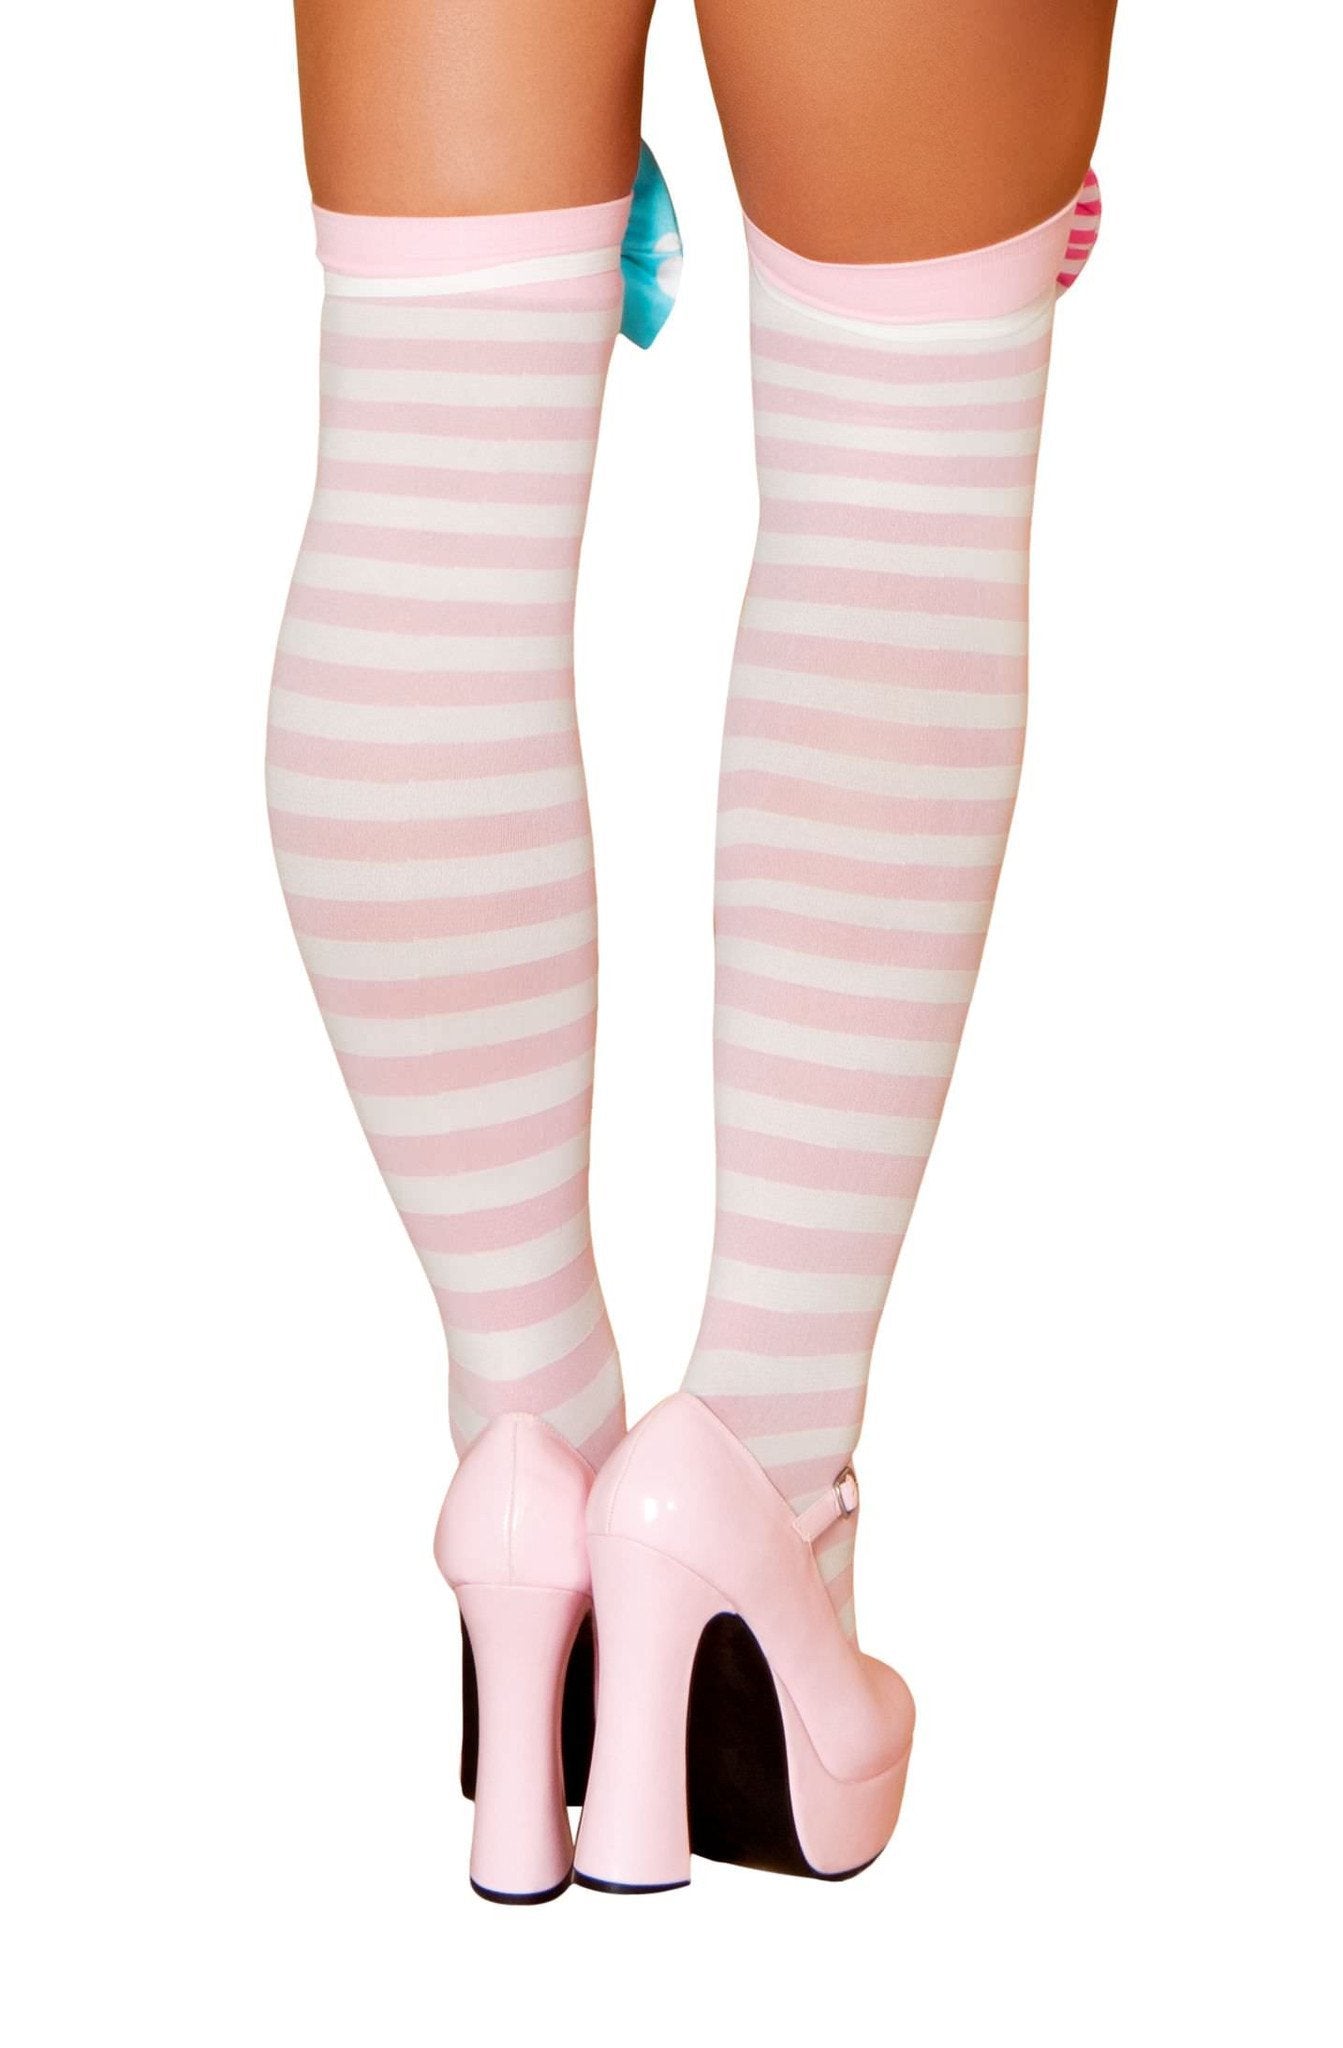 Buy Pair of Pink and White Striped Stockings from RomaRetailShop for  with Same Day Shipping Designed by Roma Costume